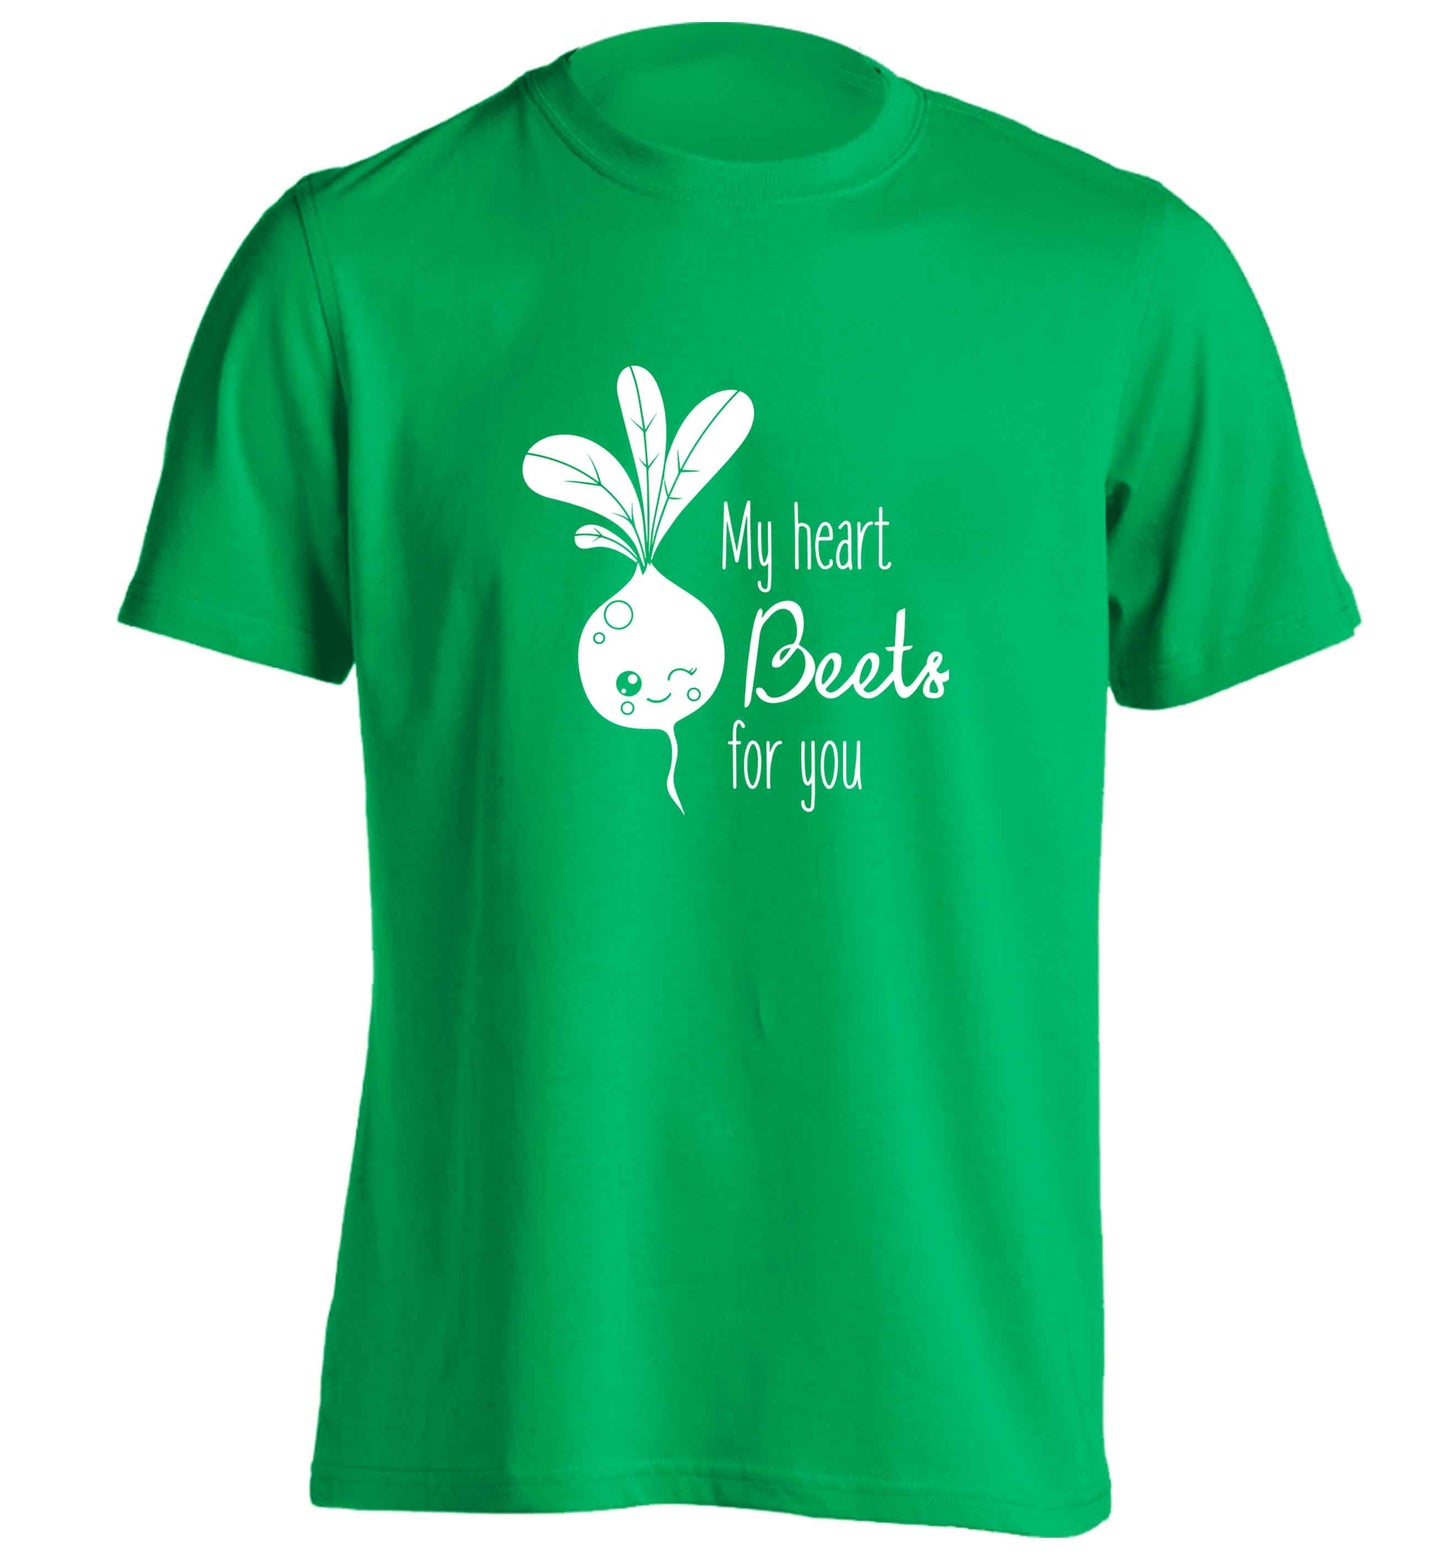 My heart beets for you adults unisex green Tshirt 2XL